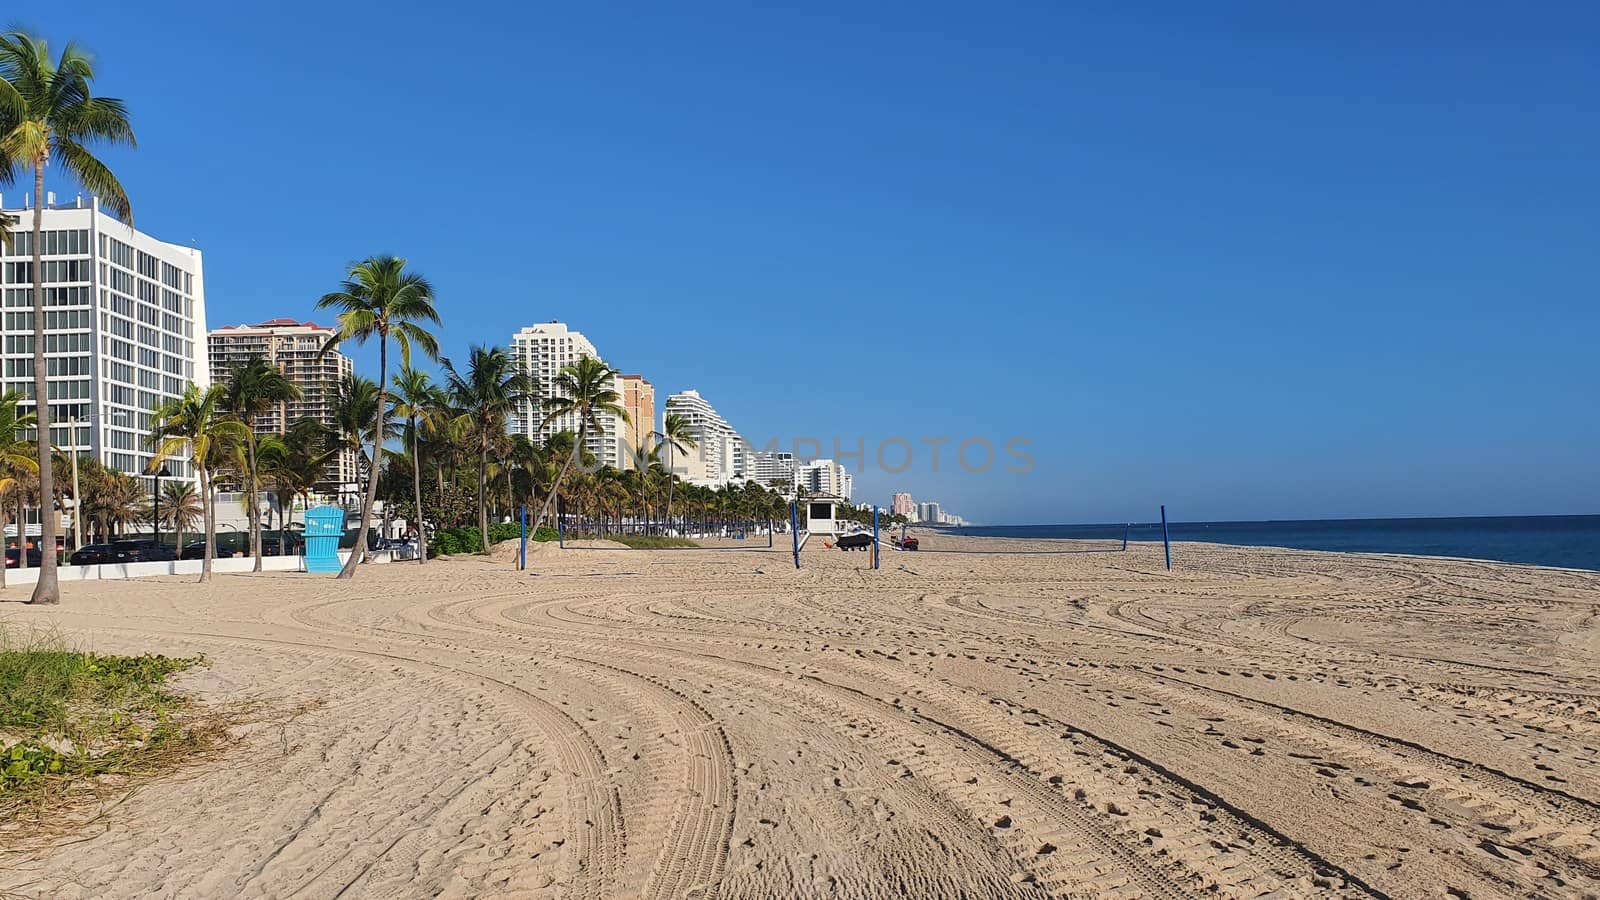 Sandy Beach of Fort Lauderdale With Blue Sky and Palm Tree by TheDutchcowboy